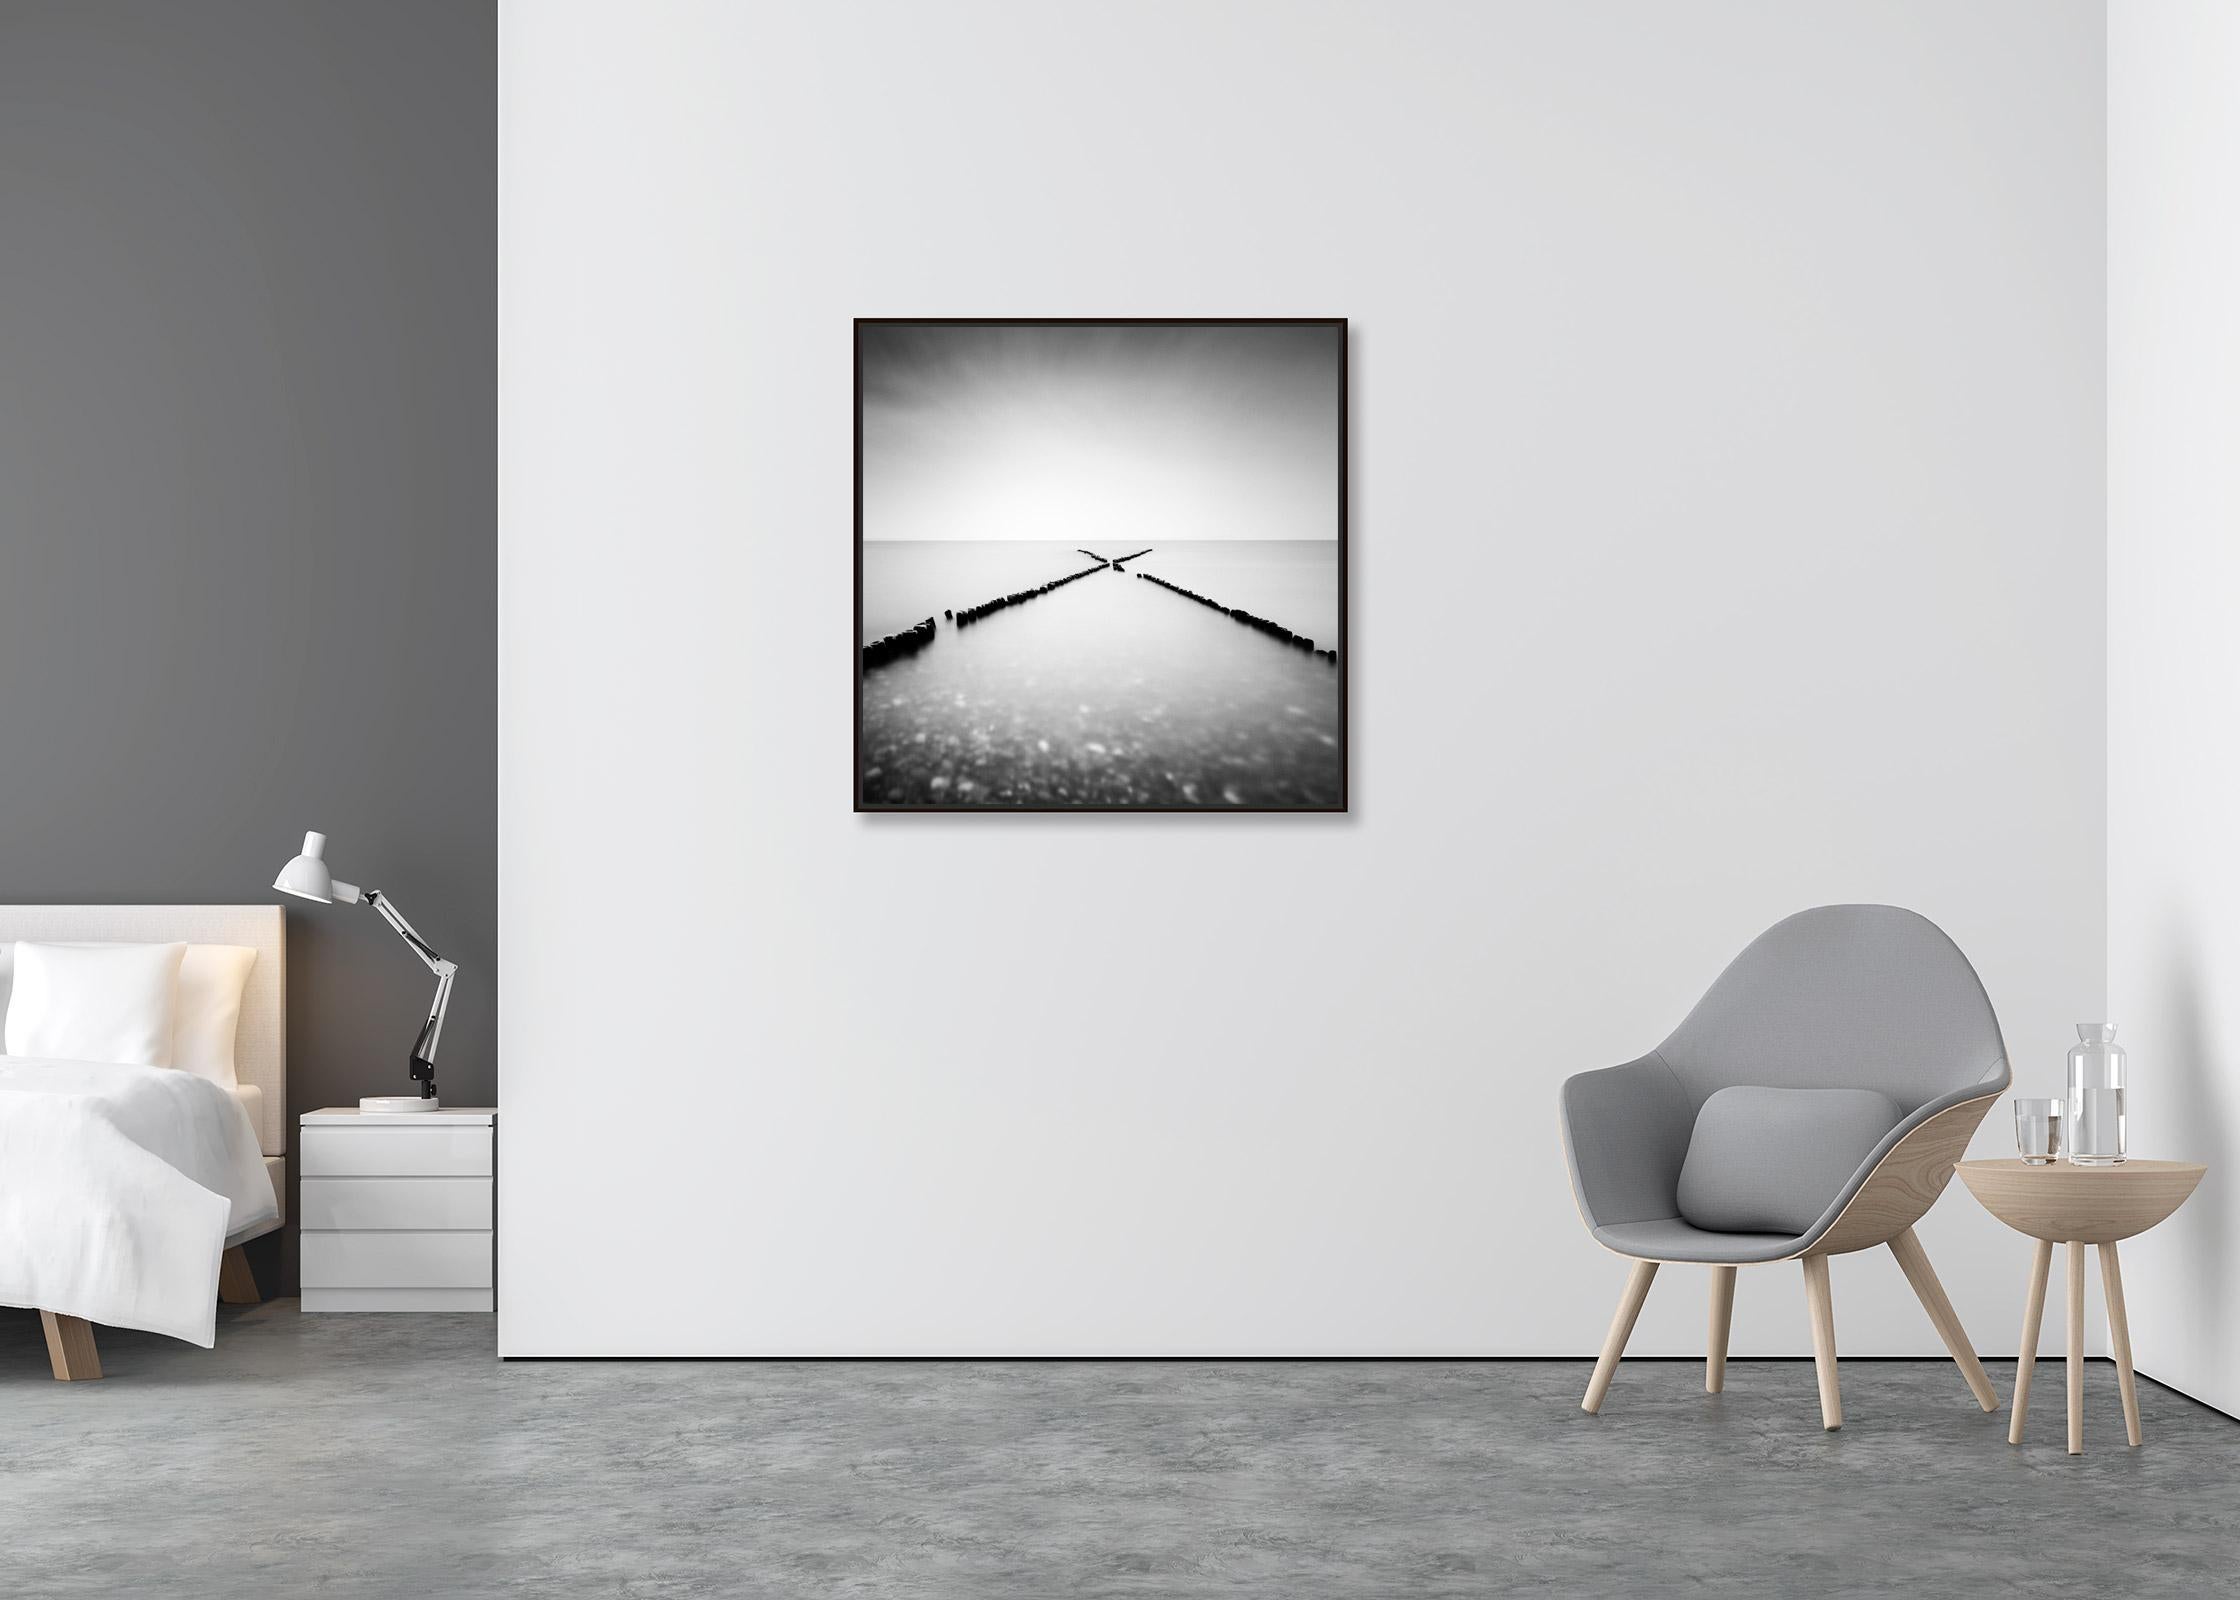 X - Factor, Sylt, Germany, long exposure, black and white waterscape photography - Contemporary Photograph by Gerald Berghammer